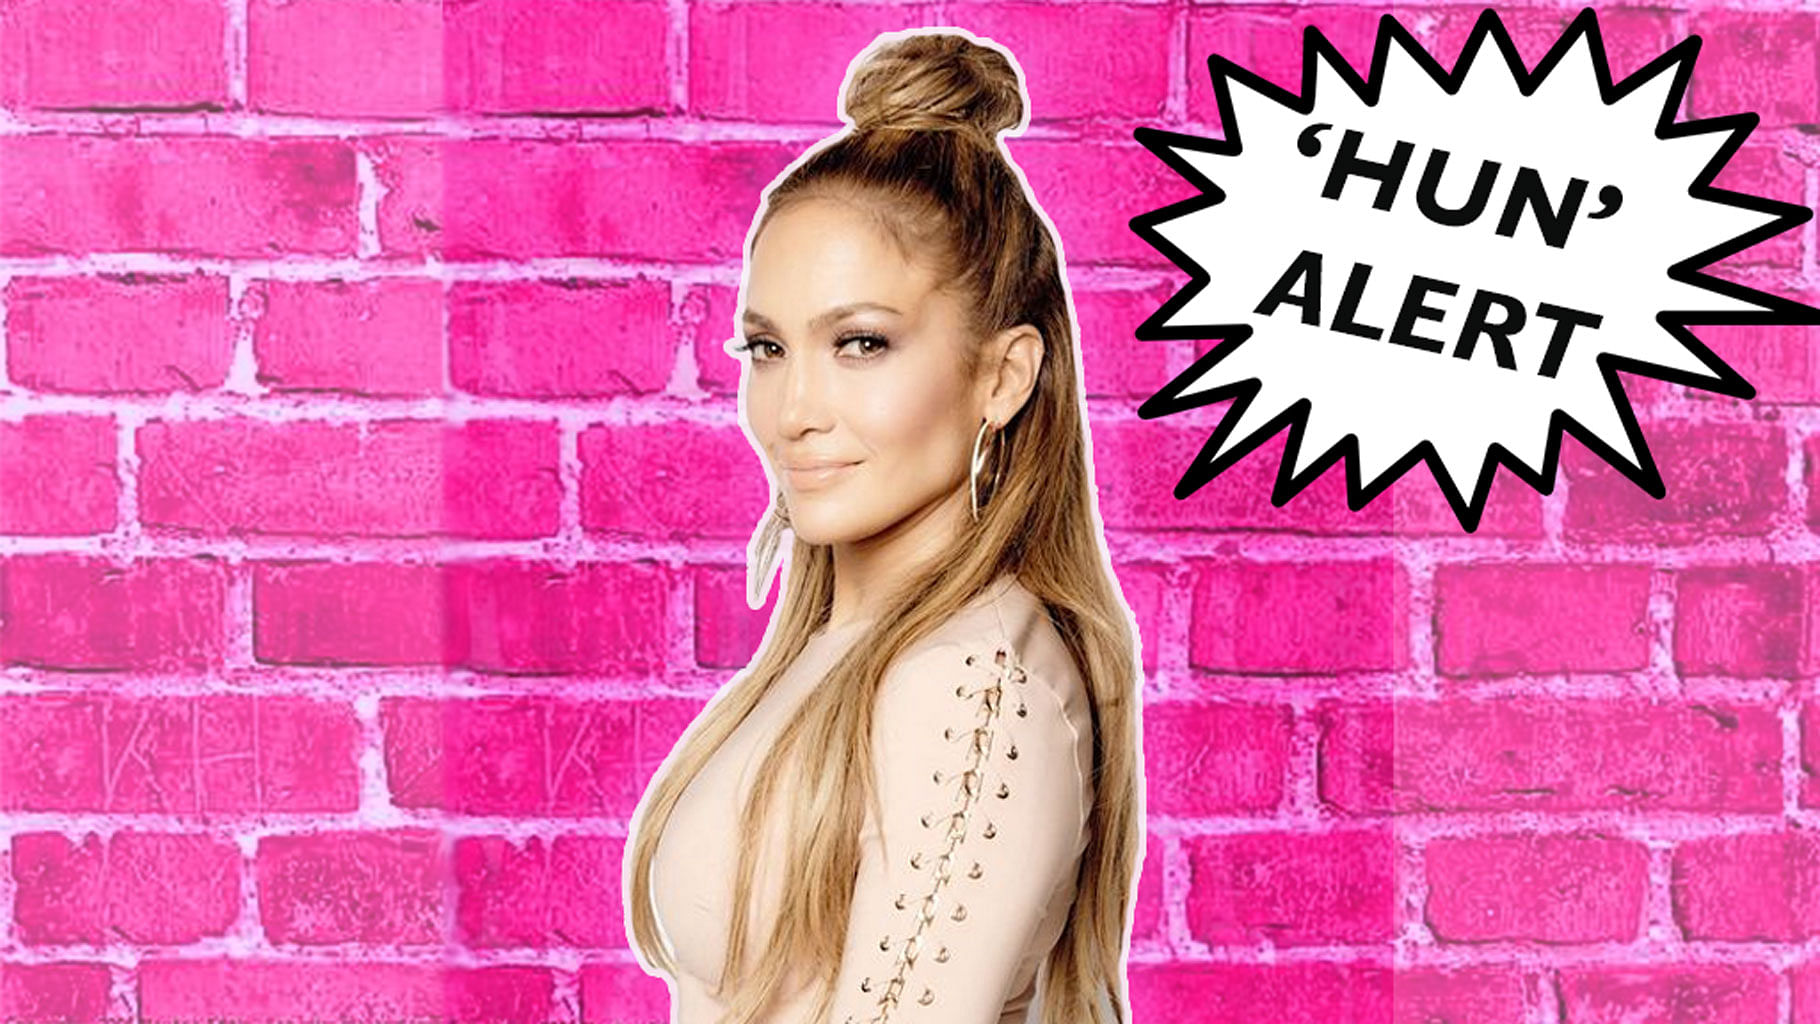 Can you rock the hun aka half bun, quite like Jennifer Lopez? (Photo: Pinterest, altered by The Quint)